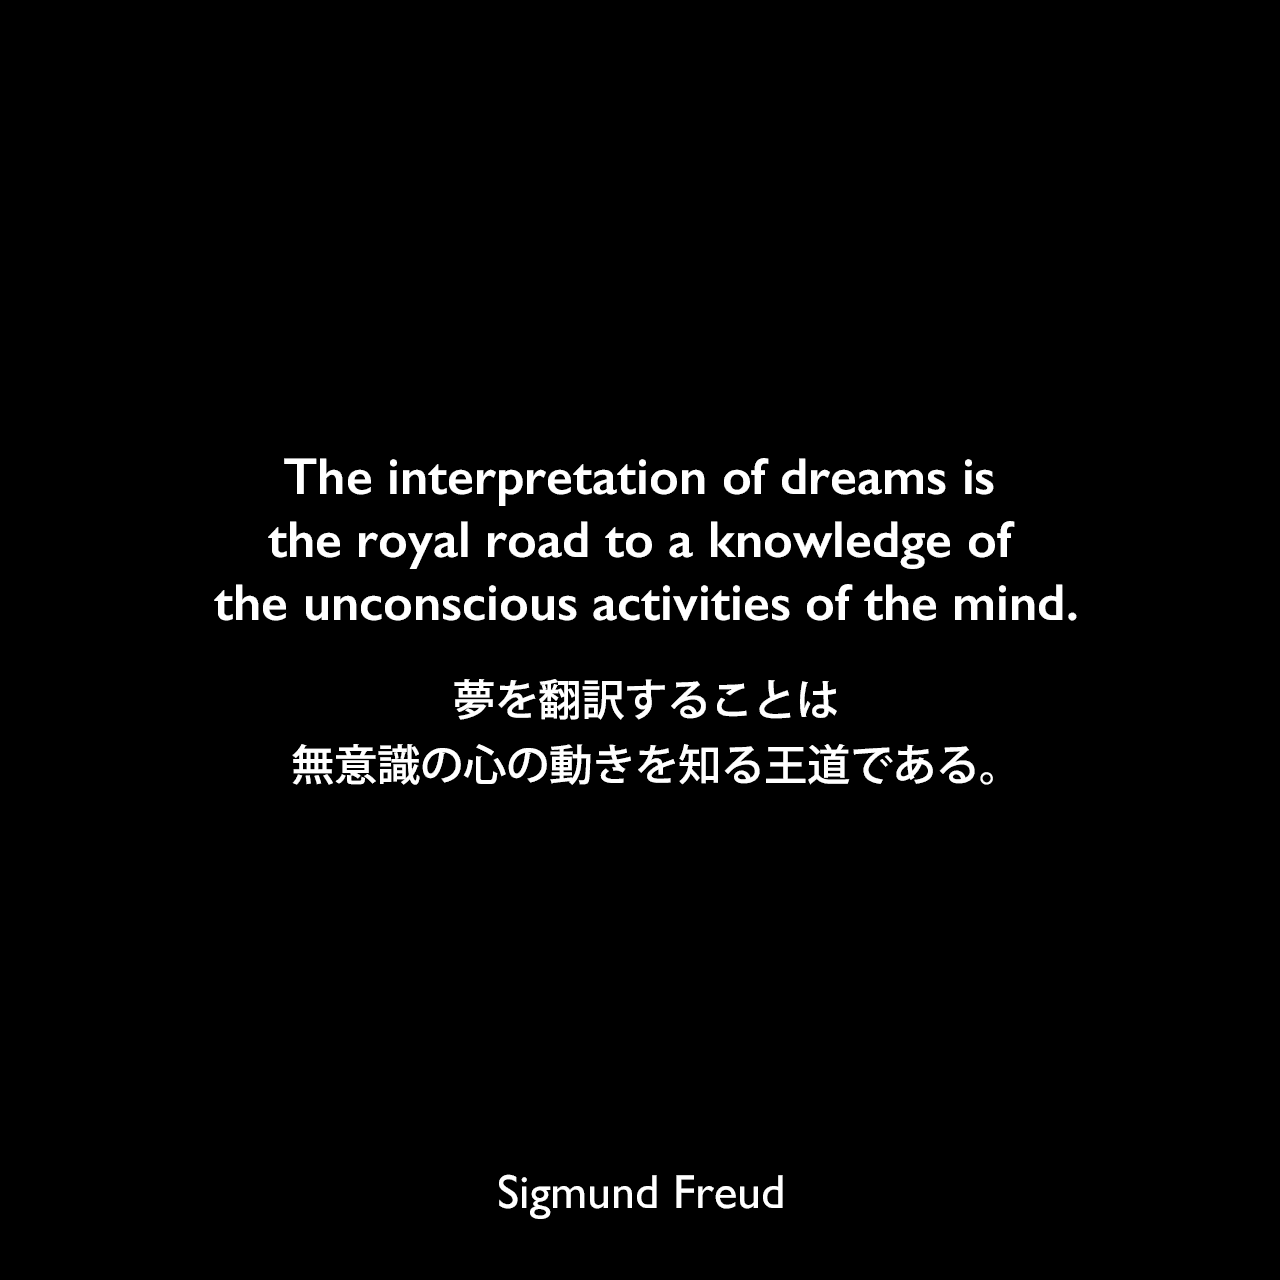 The interpretation of dreams is the royal road to a knowledge of the unconscious activities of the mind.夢を翻訳することは、無意識の心の動きを知る王道である。- フロイトによる本「夢判断」よりSigmund Freud